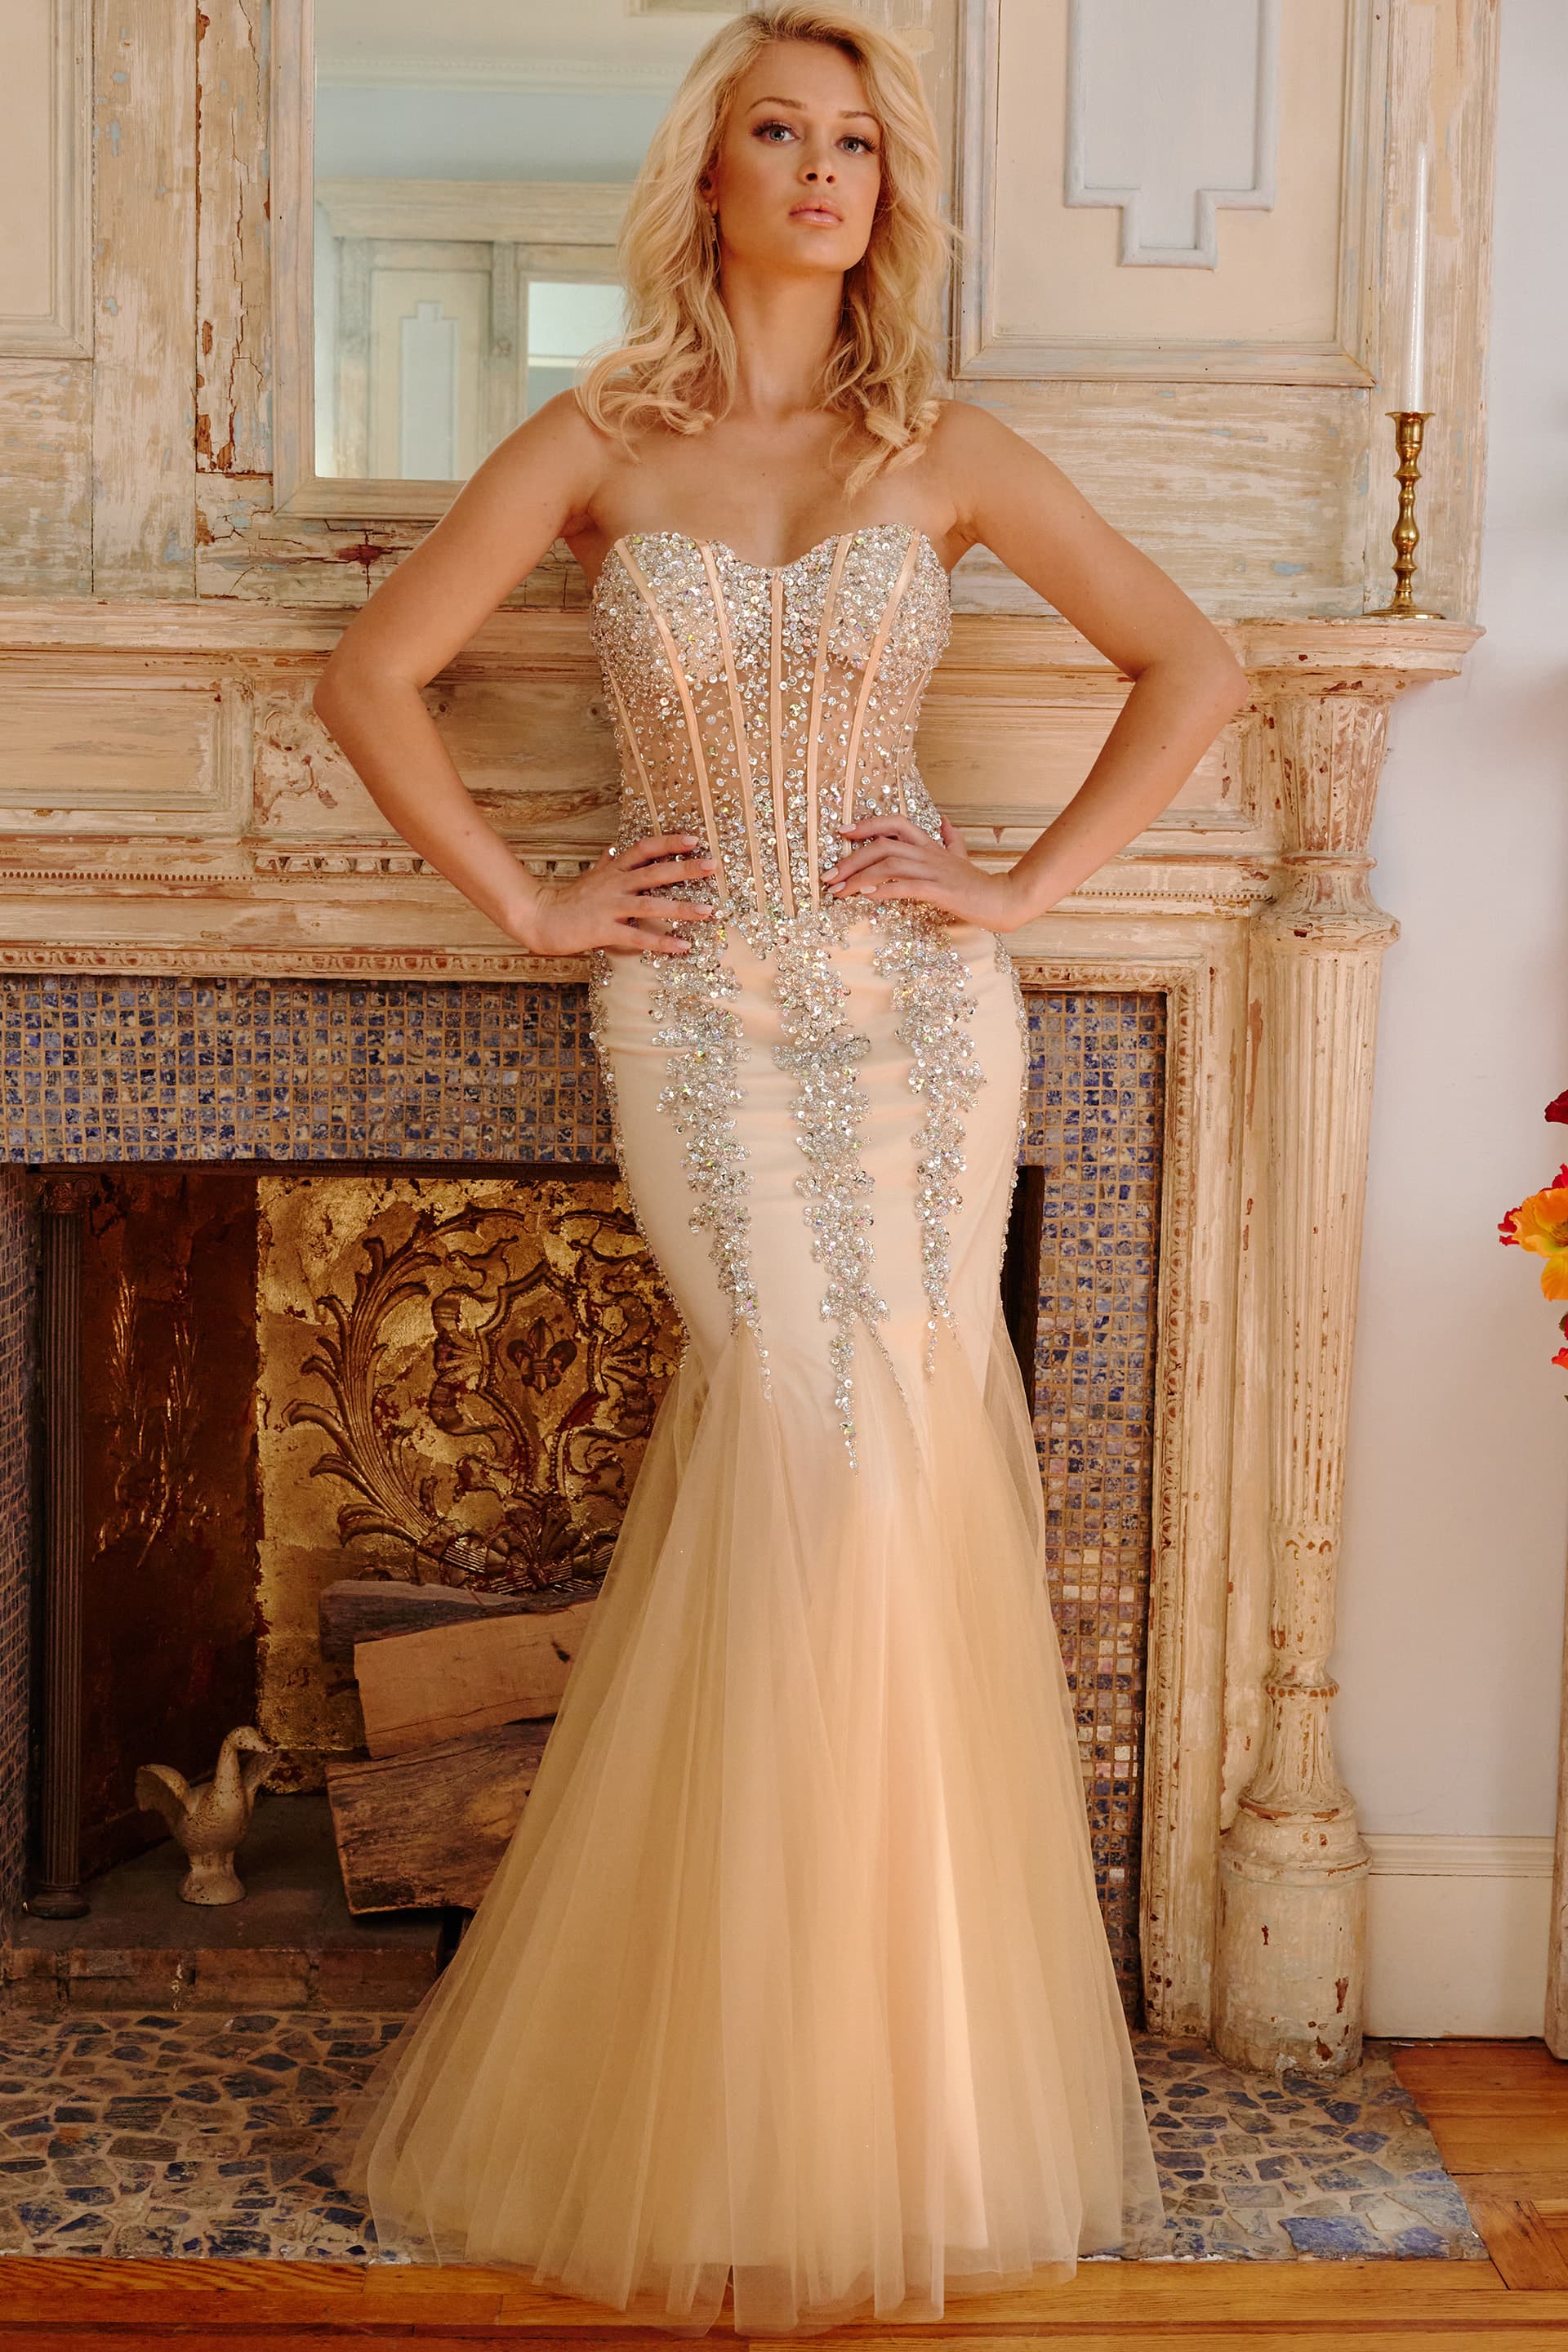 Sensual corset bodice evening gown for that special day.